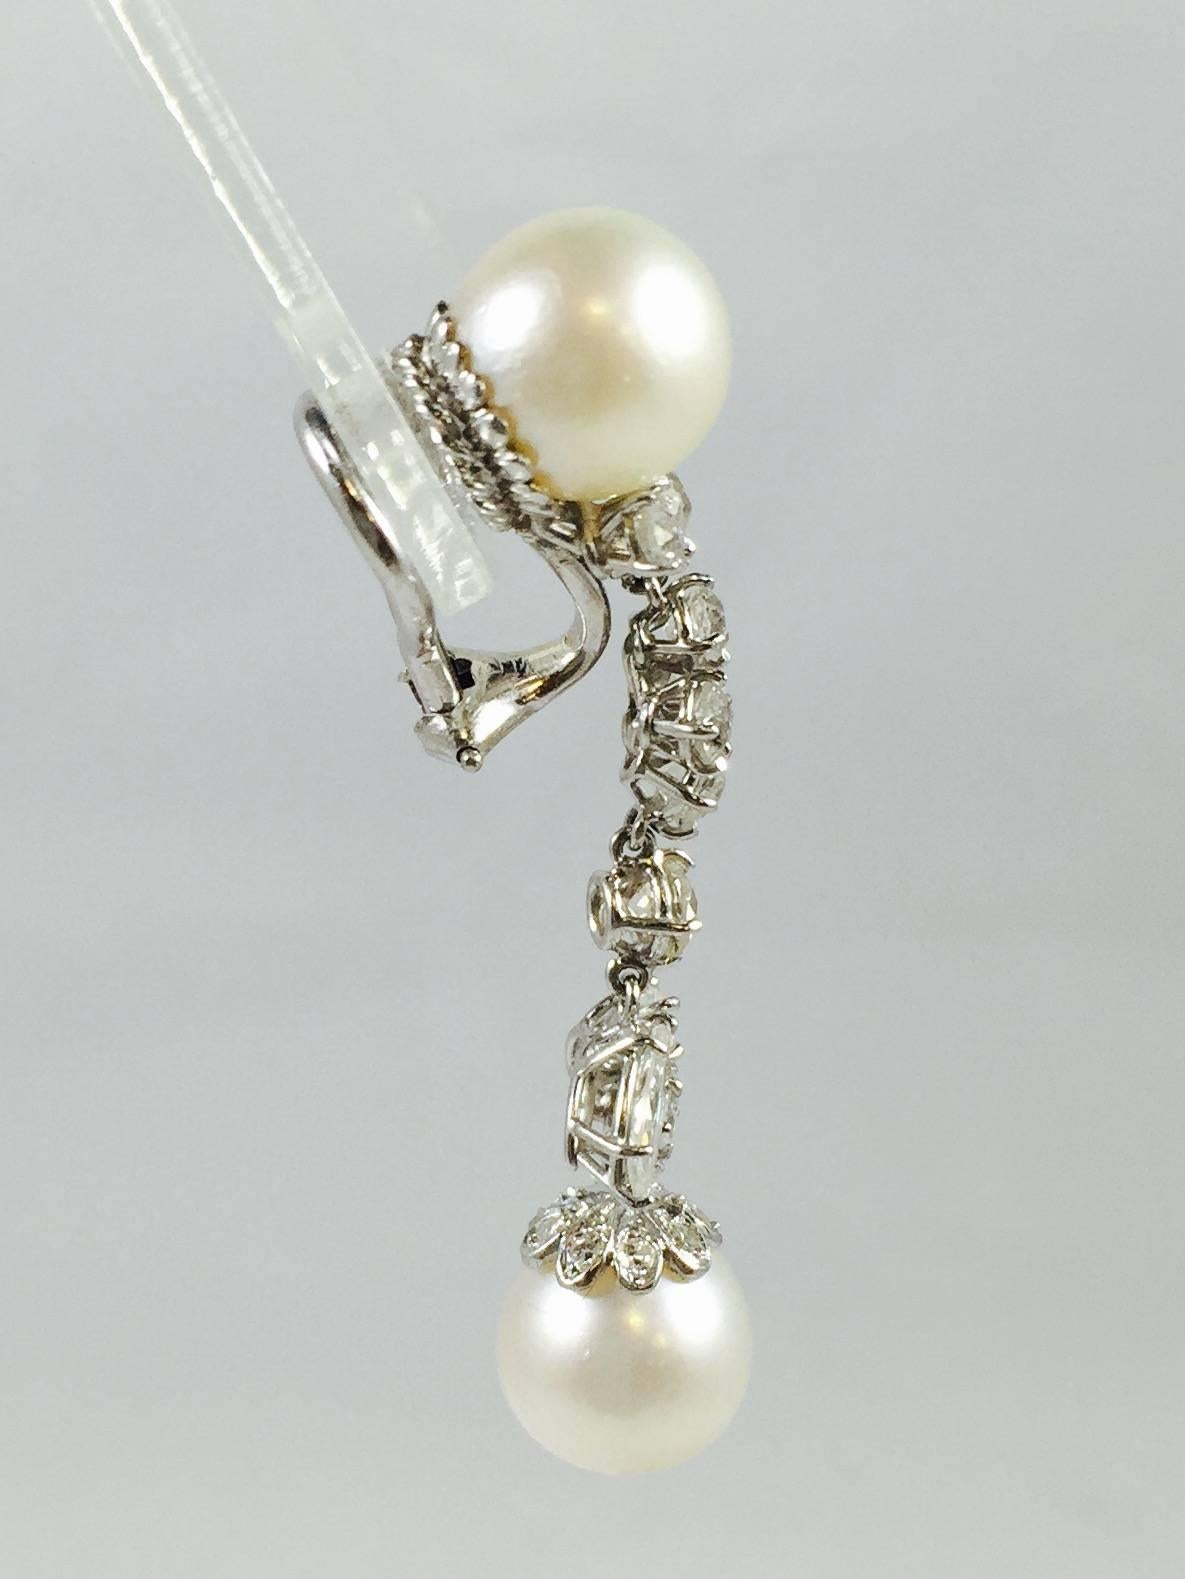 Perfection in Platinum!  A must have for any jewelry wardrobe!  Matched white lustrous beautifully end capped pearls stand between an artful drop of brilliant cut and marquise cut diamonds having an impressive 2.60 ct tw with F/G color, VS clarity. 